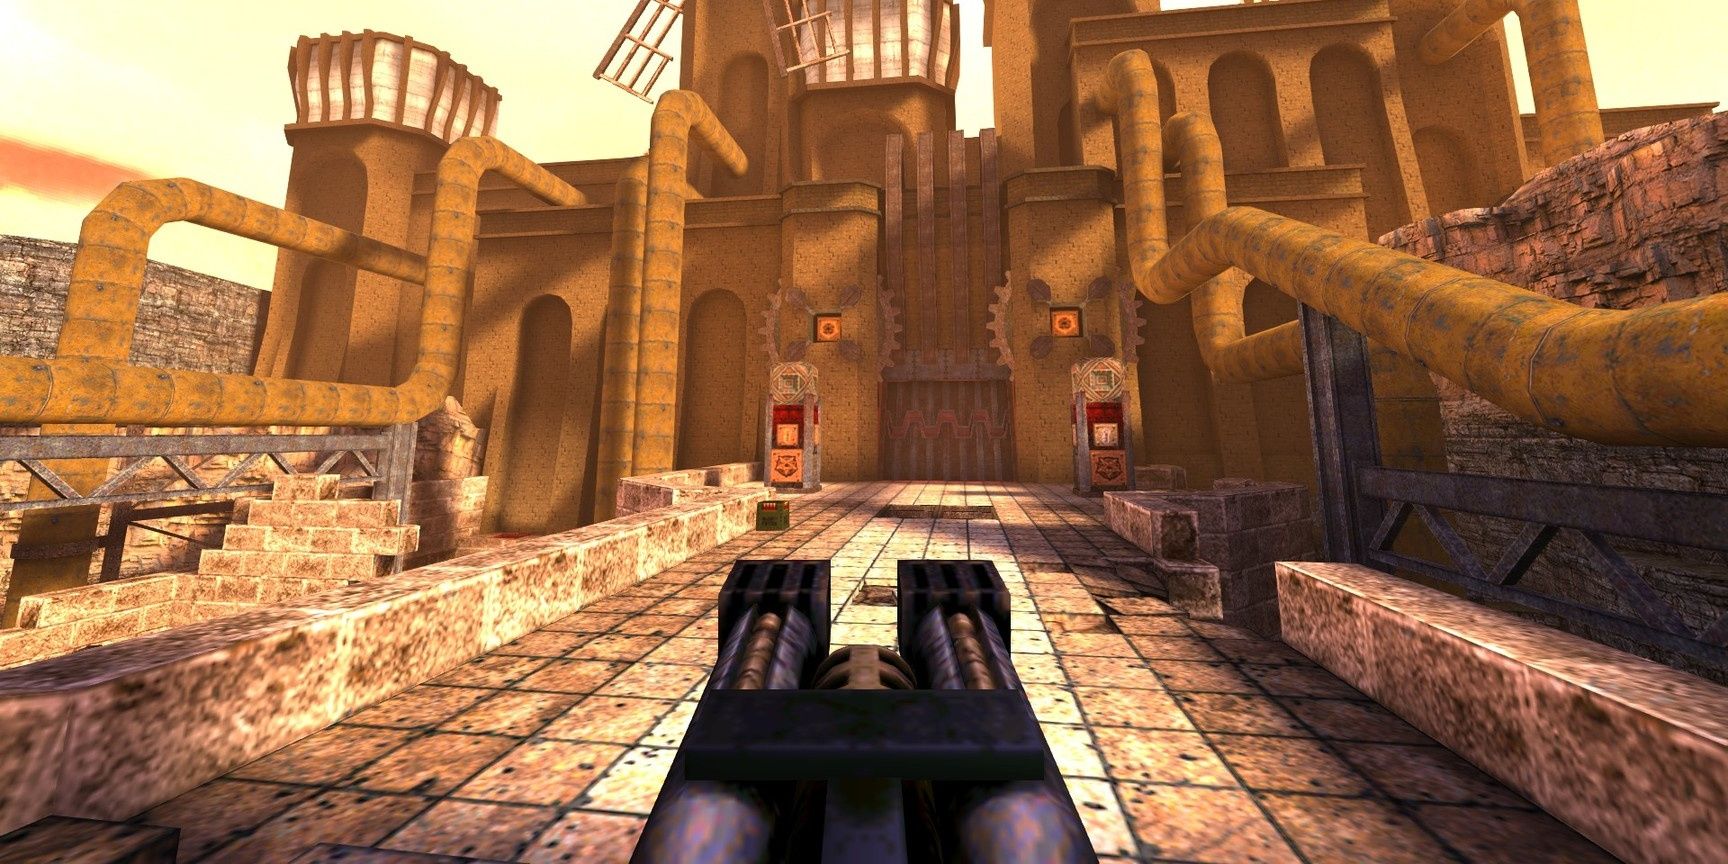 A screenshot showing gameplay in the Quake remaster